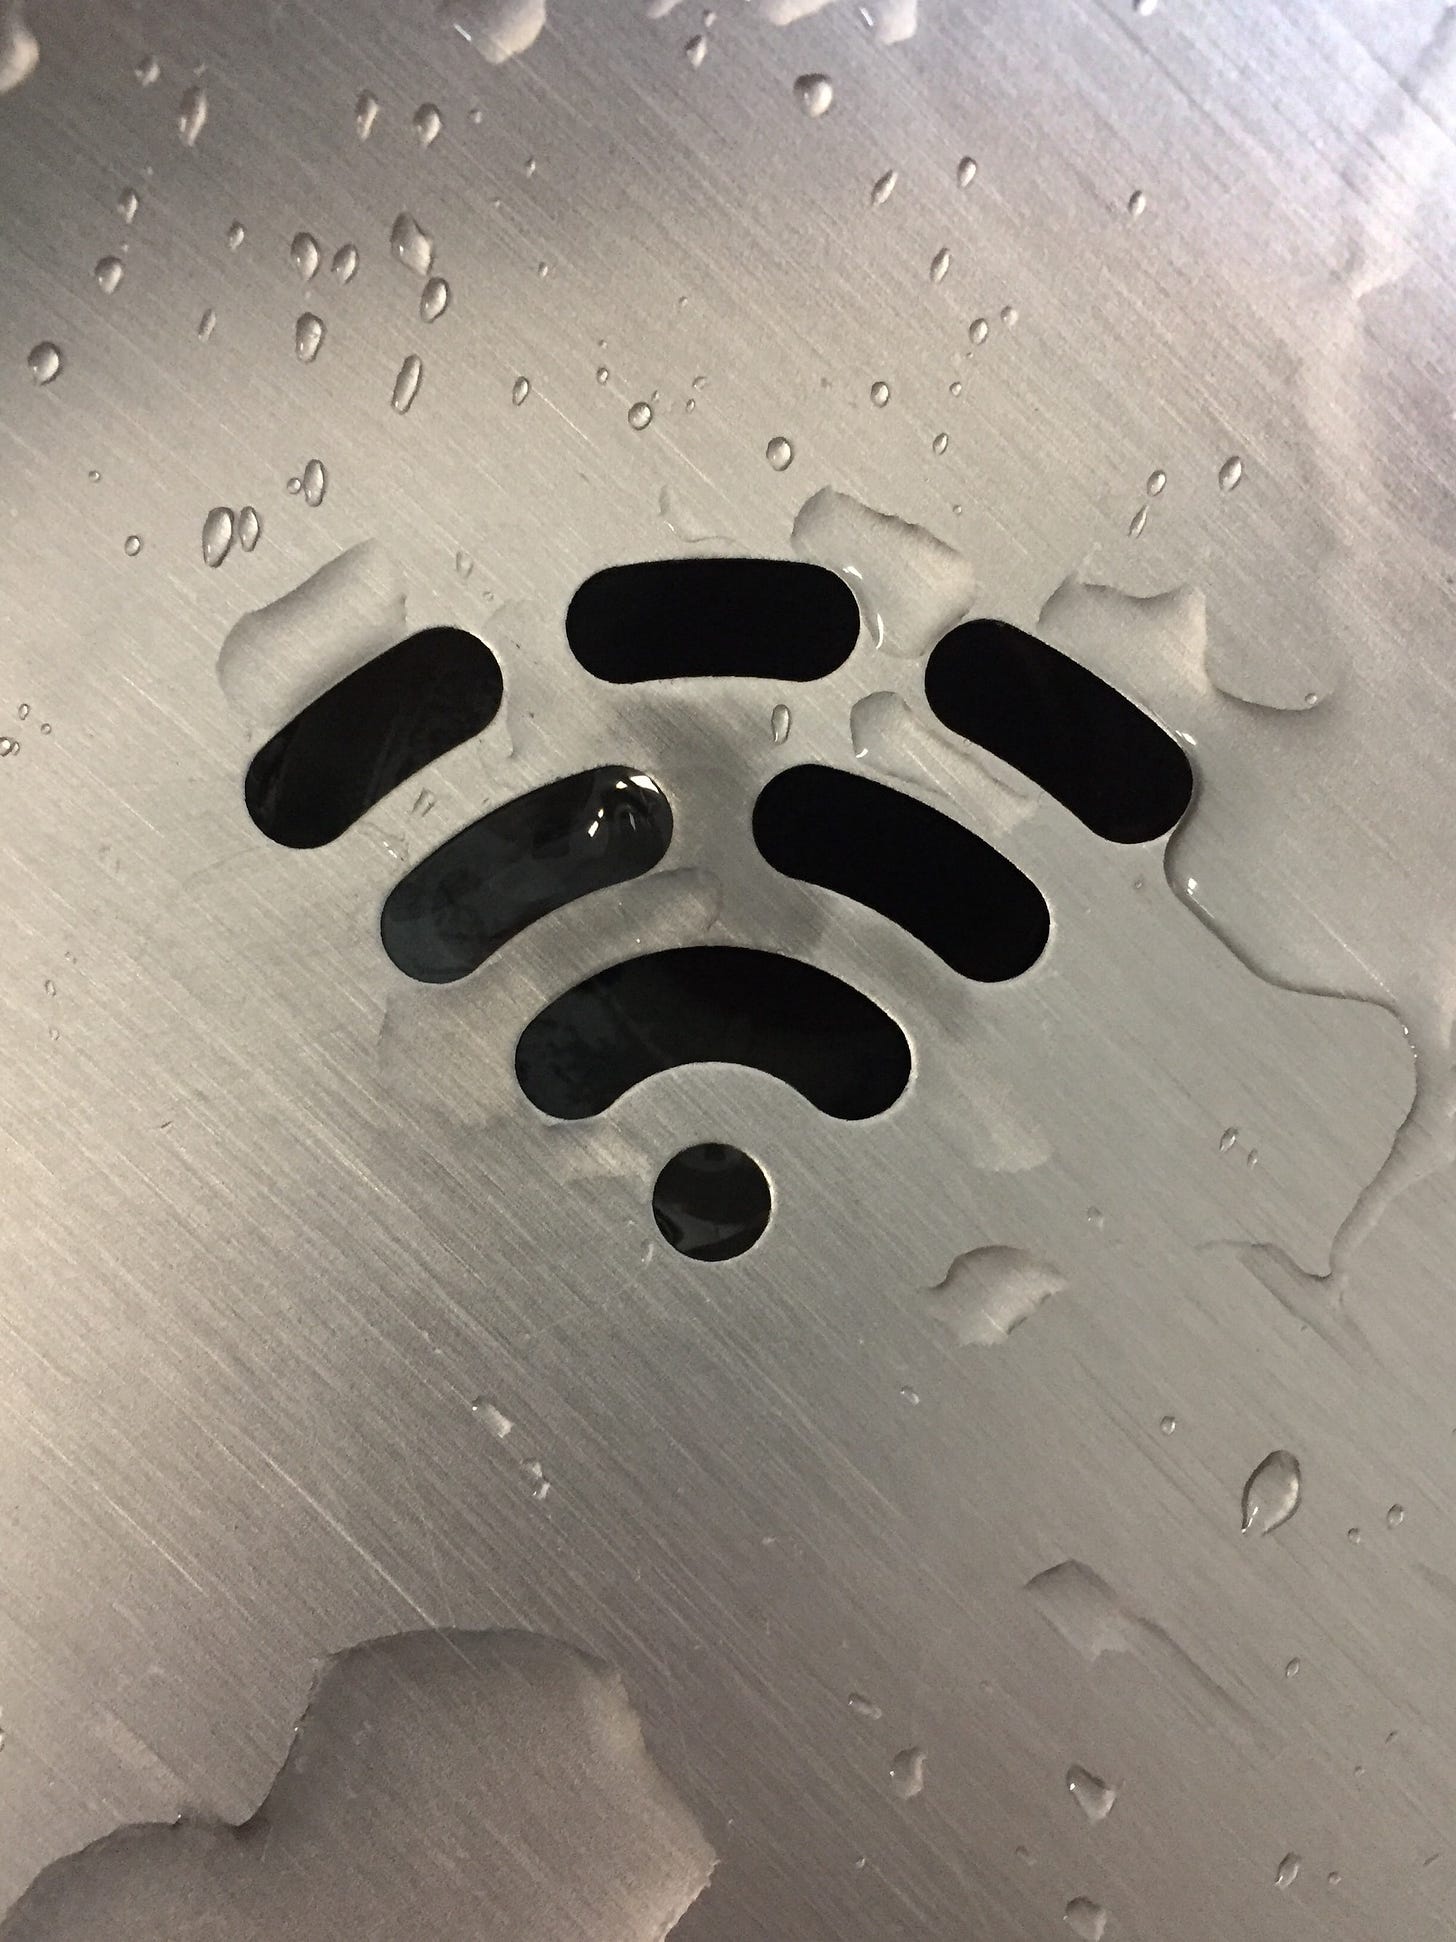 A water fountain drain that looks like the Wi-Fi symbol. Honeygain users earn points that they can convert to cash